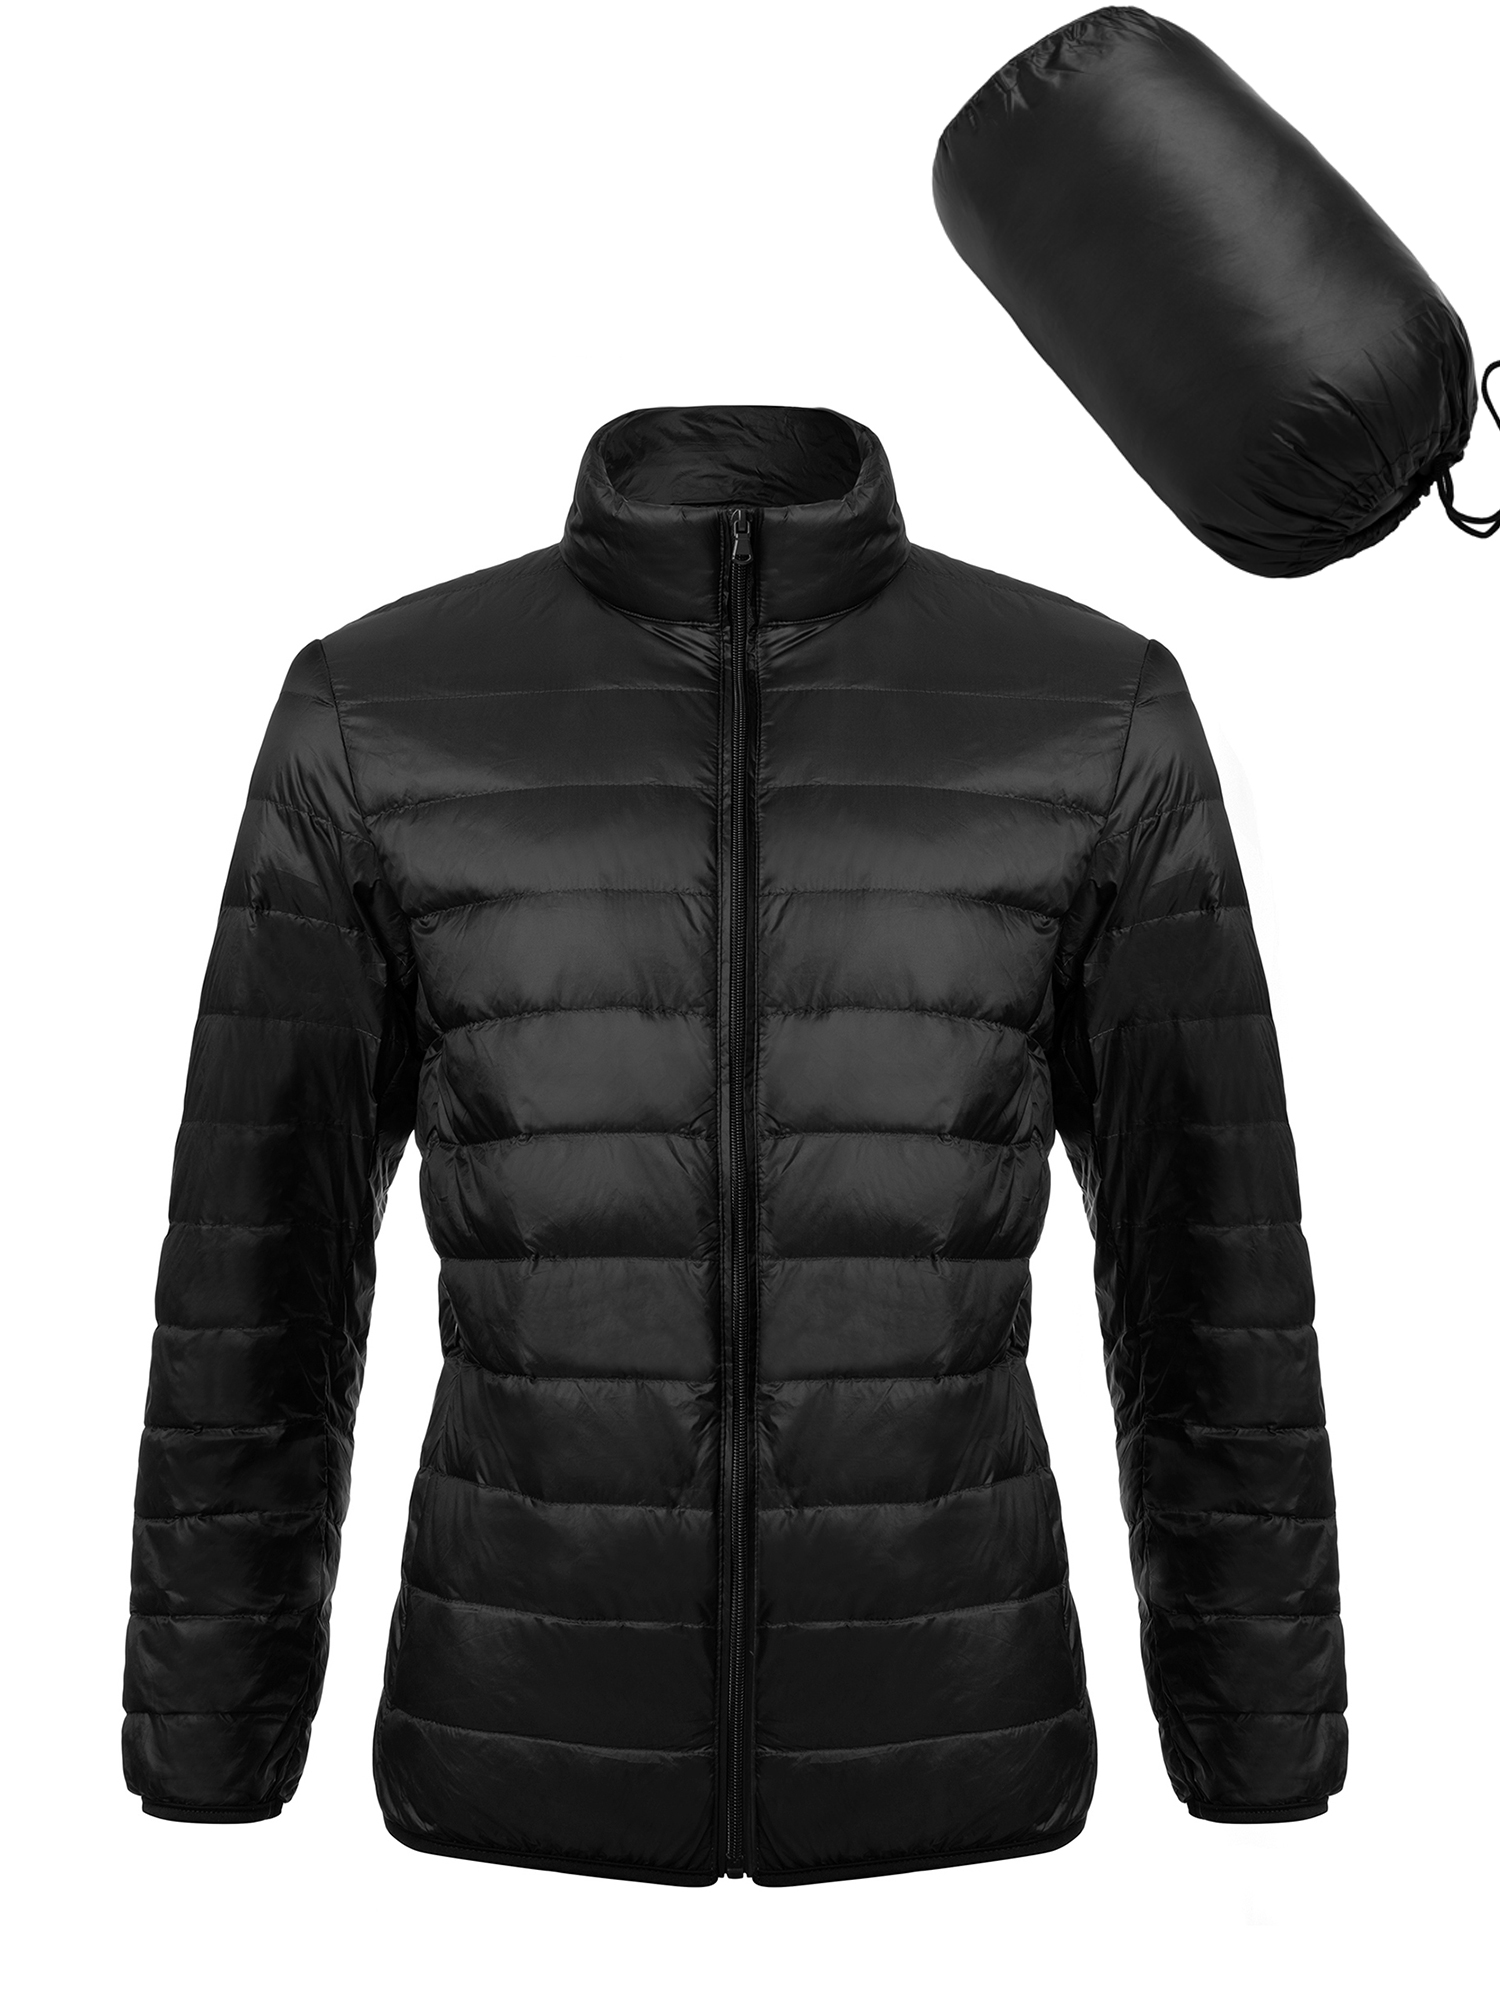 Men's Slim Fit Lightweight Zip Insulated Packable Down Puffer Jacket Packable Water-Resistant Rain Coat Puffer Jacket (Standard 2XL and Big & Tall ) - image 1 of 8